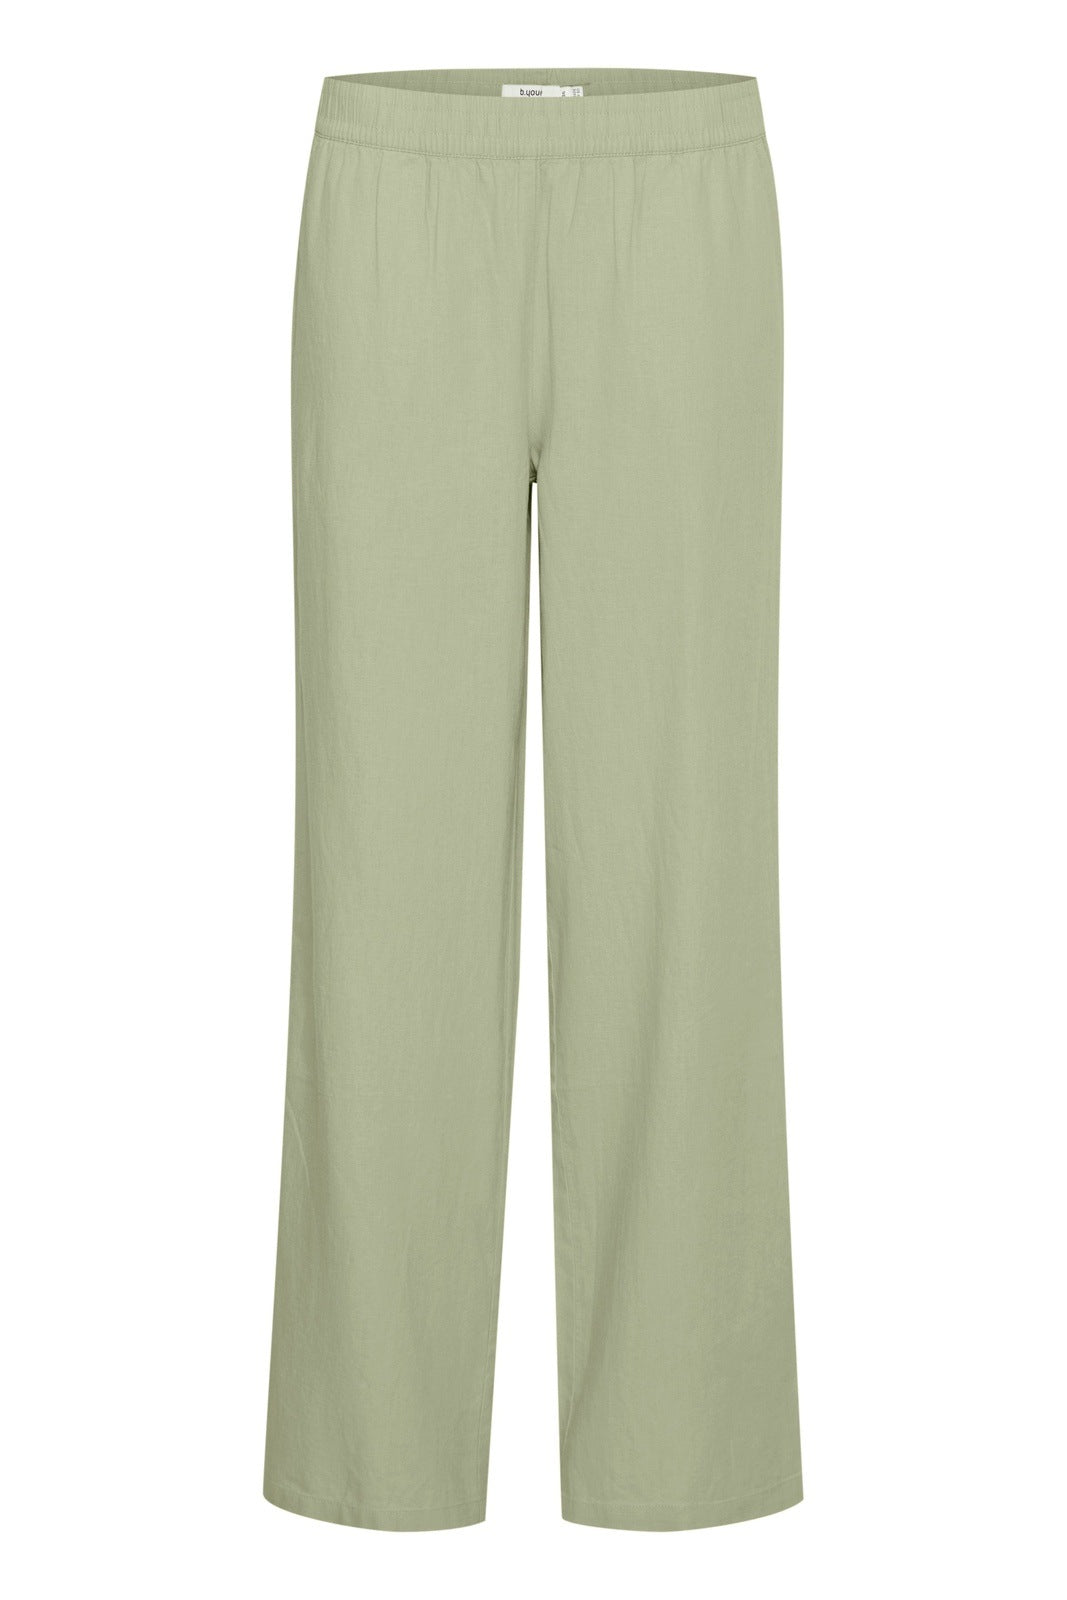 B.young Casual Pants 1 Shaws Department Stores